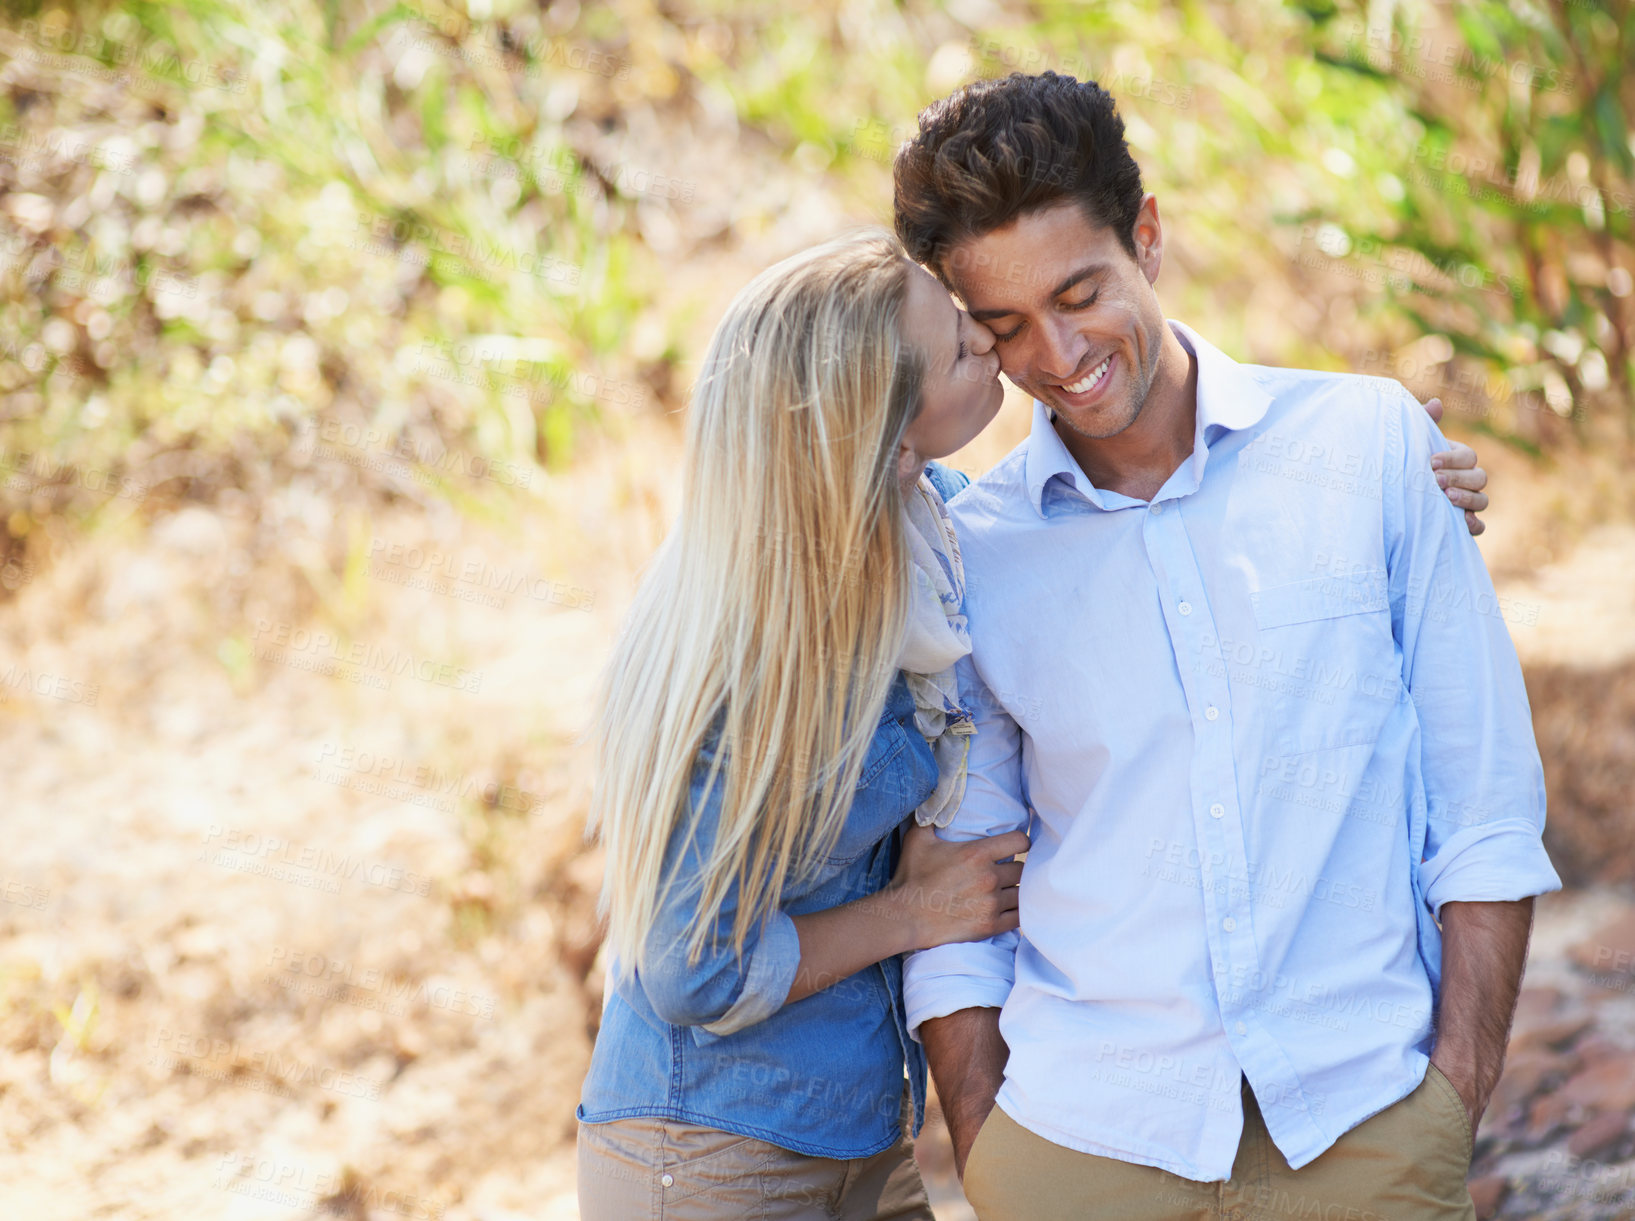 Buy stock photo Happy couple, kiss and hug in nature for love, support or affection in outdoor walk or bonding. Young woman and man on cheek with smile for embrace, comfort or romance in forest or woods together